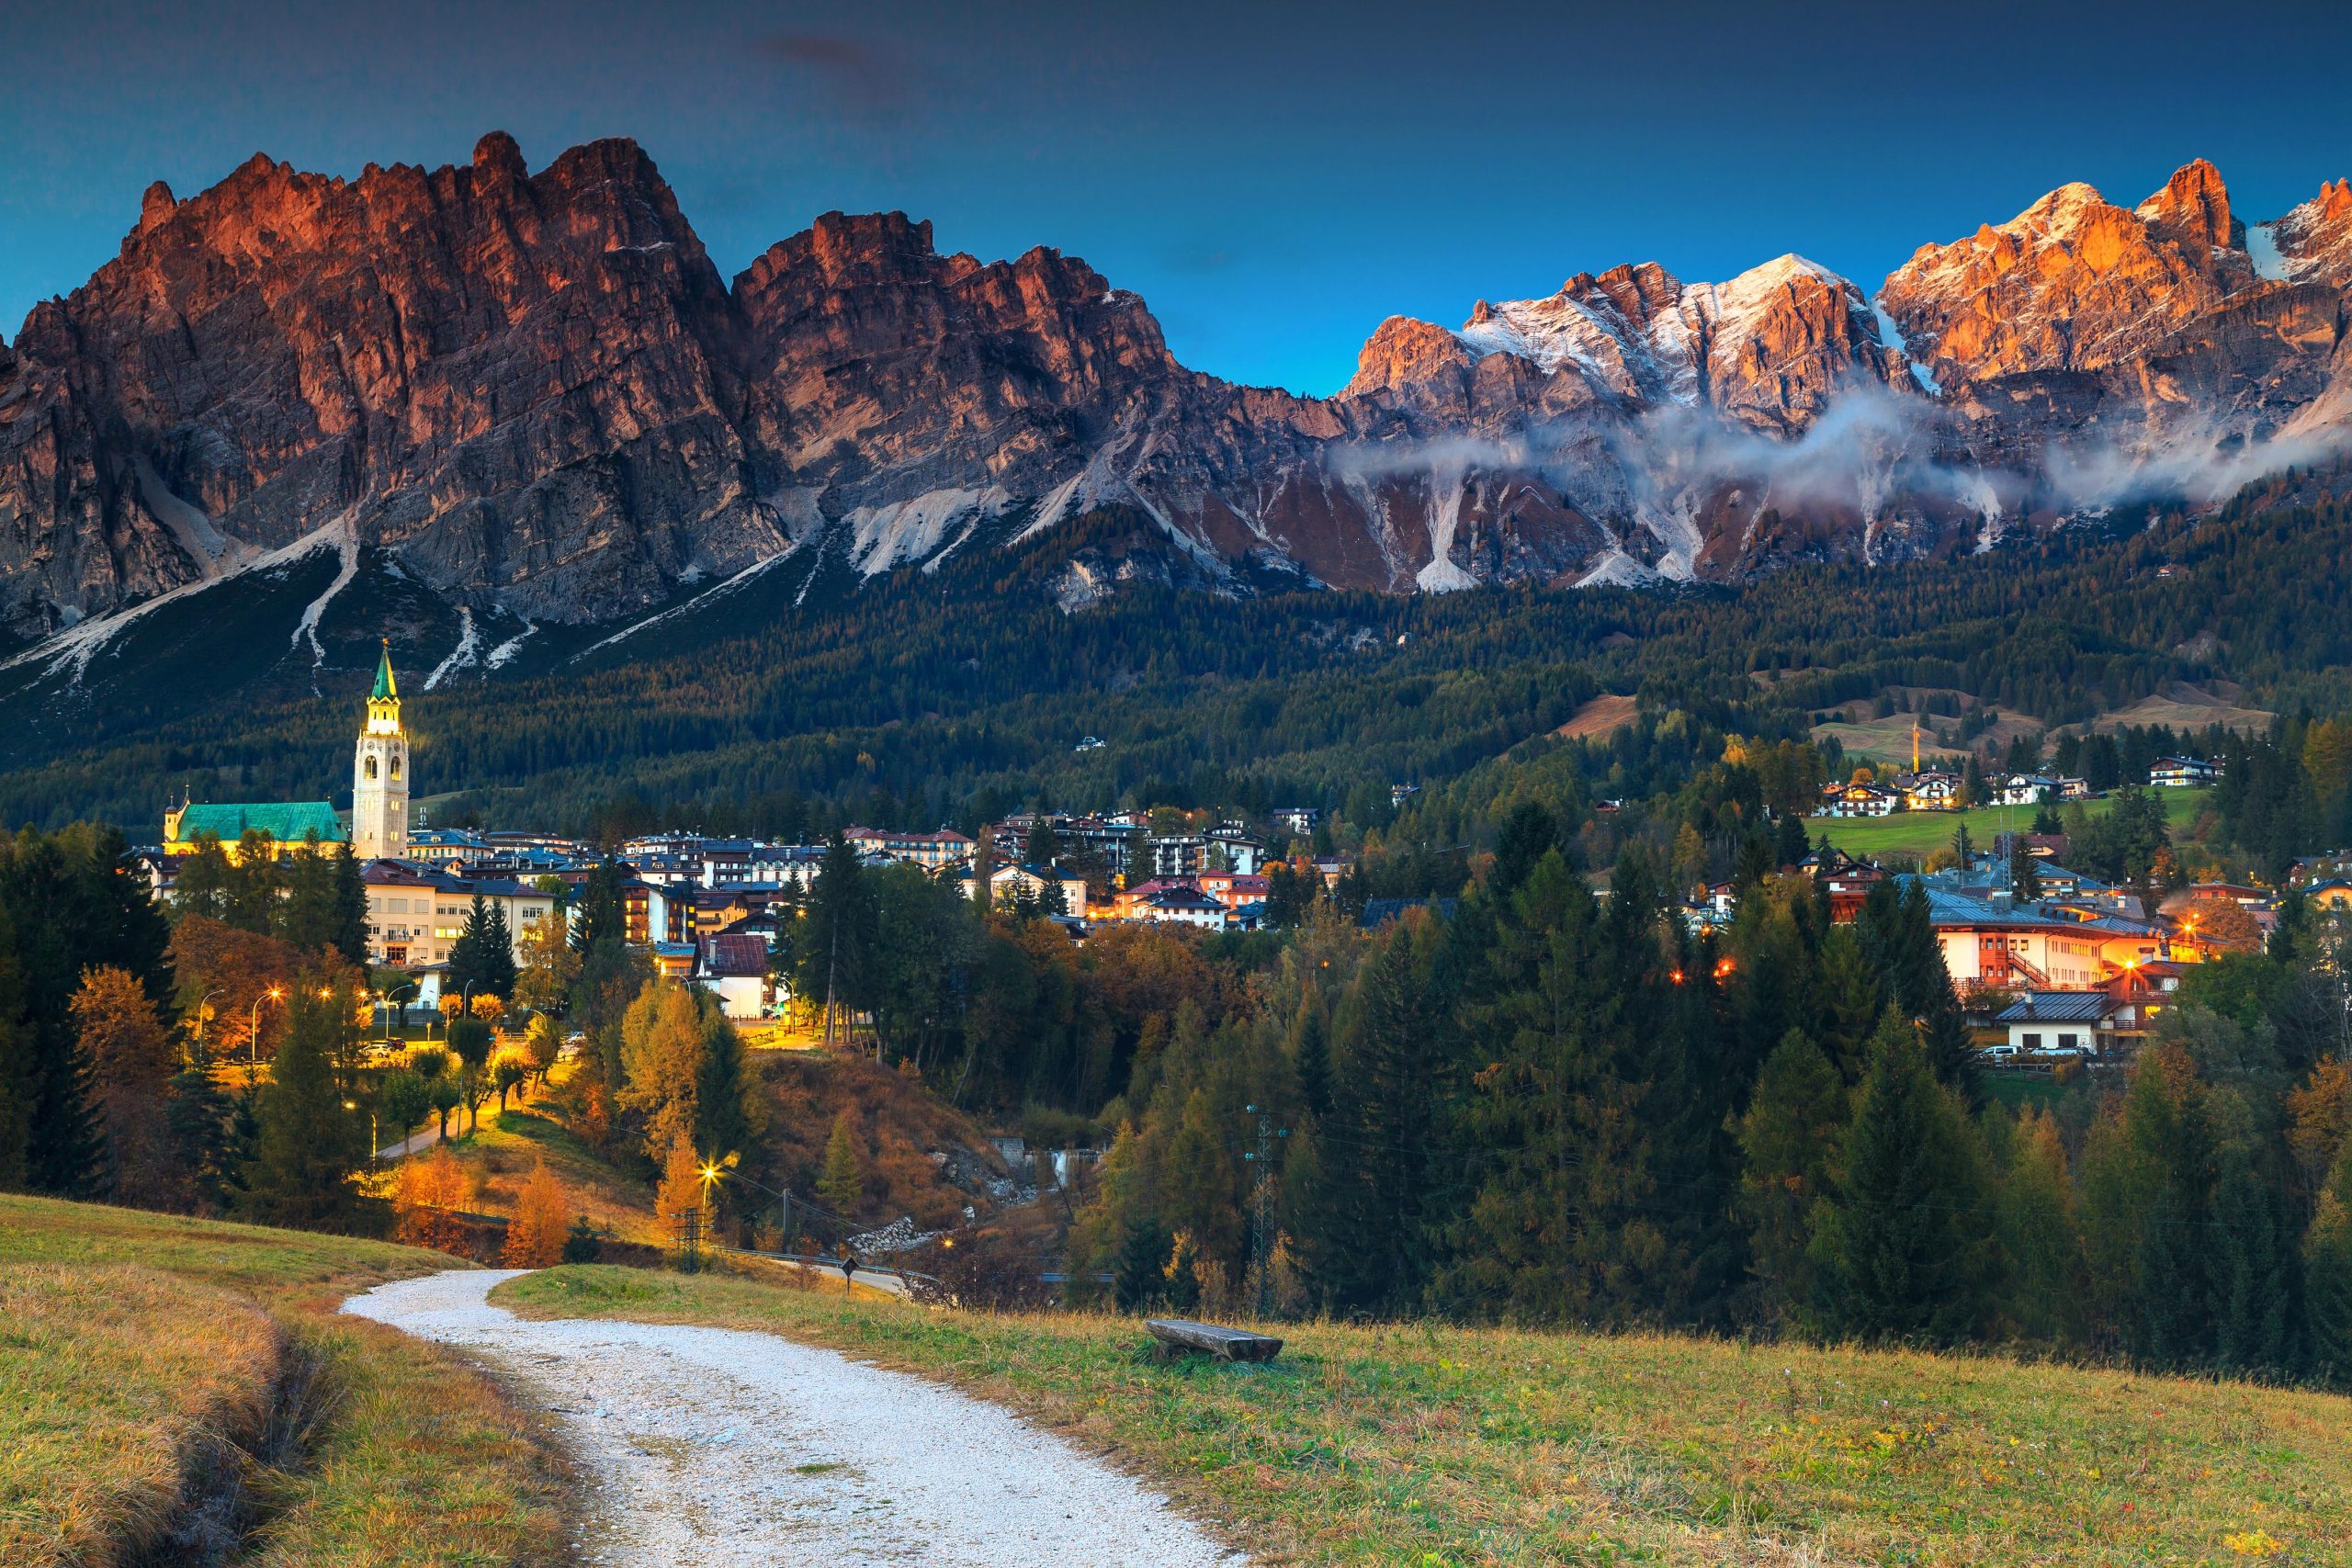 Amazing cityscape with high snowy mountains in background,Dolomites,Italy